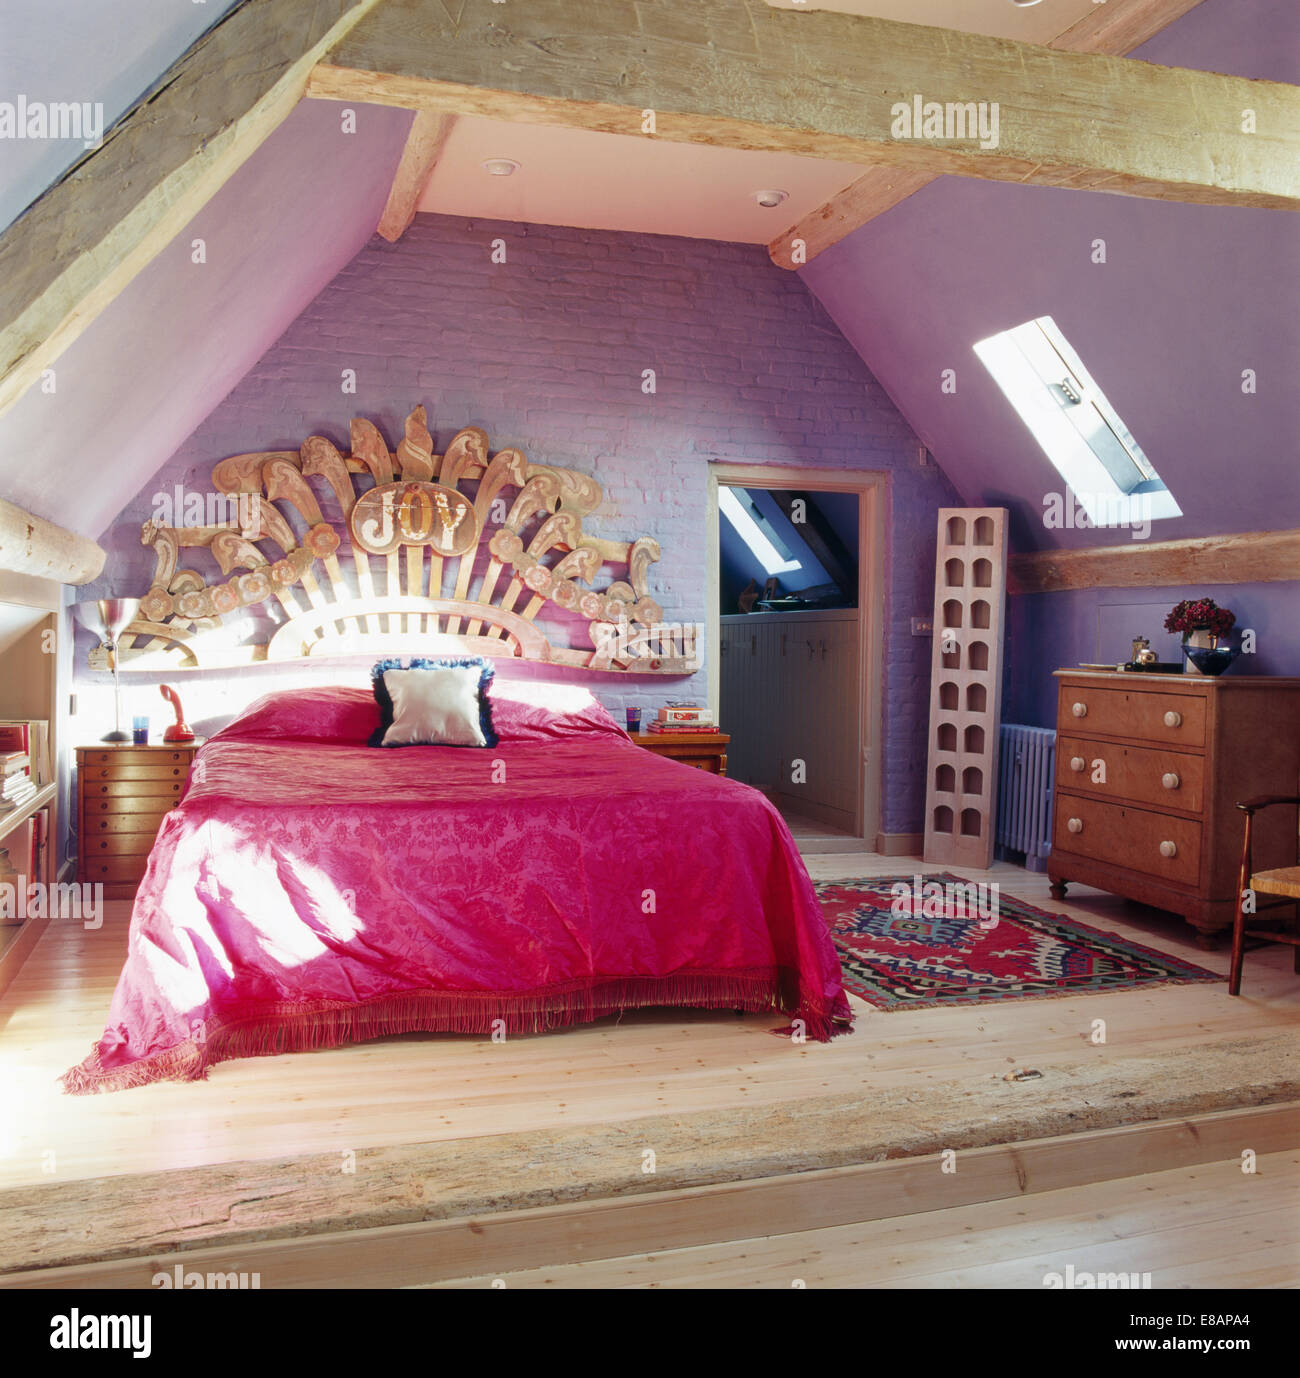 Large wooden carving above bed with pink bedcover in mauve attic bedroom Stock Photo